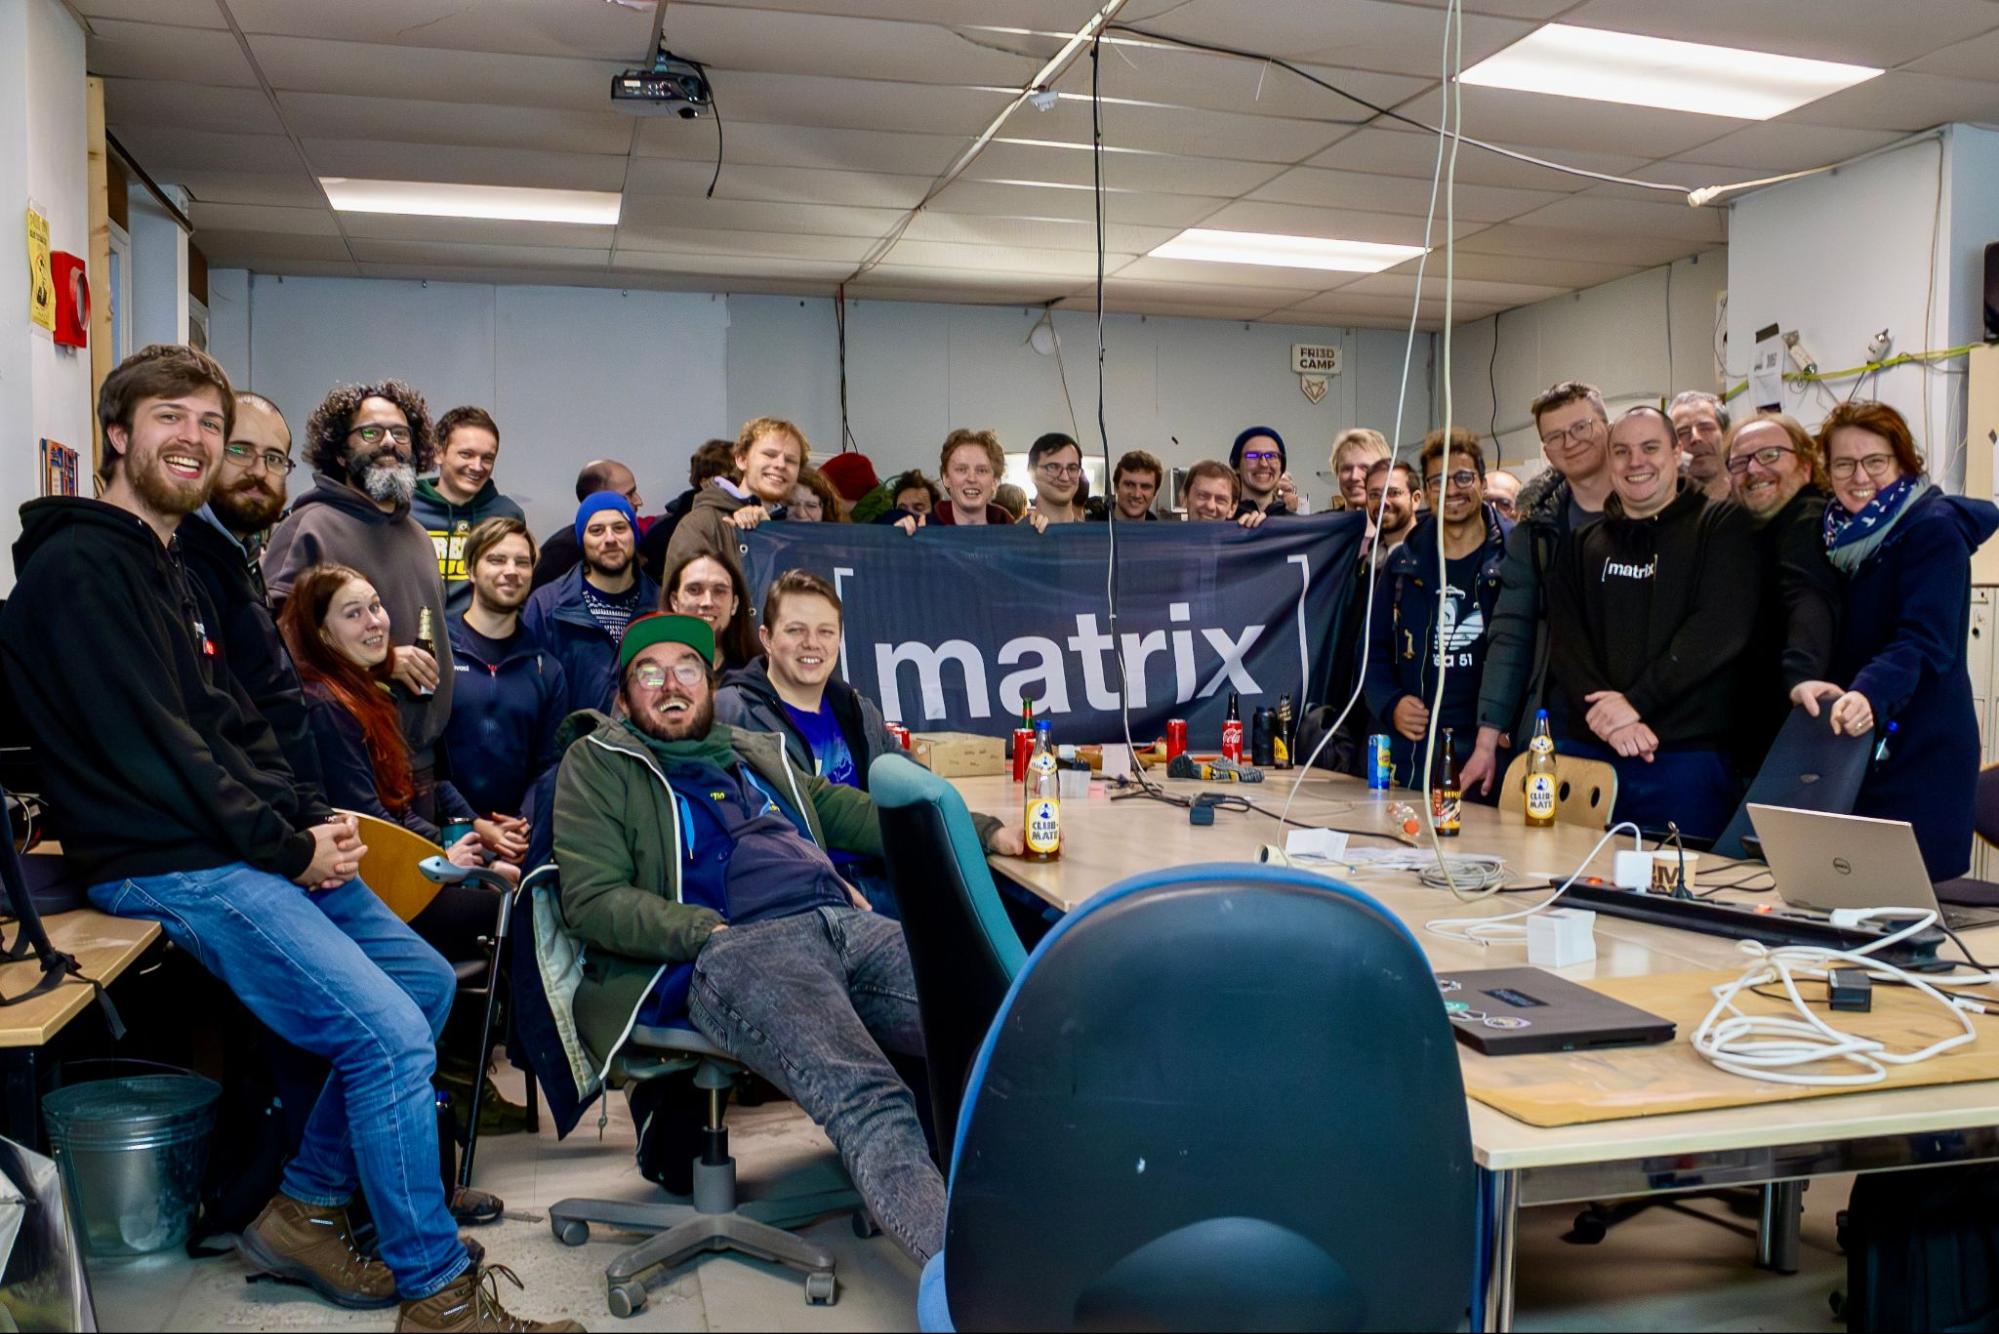 A picture of several dozens of people smiling in a room. Some of them are holding a Matrix flag together.